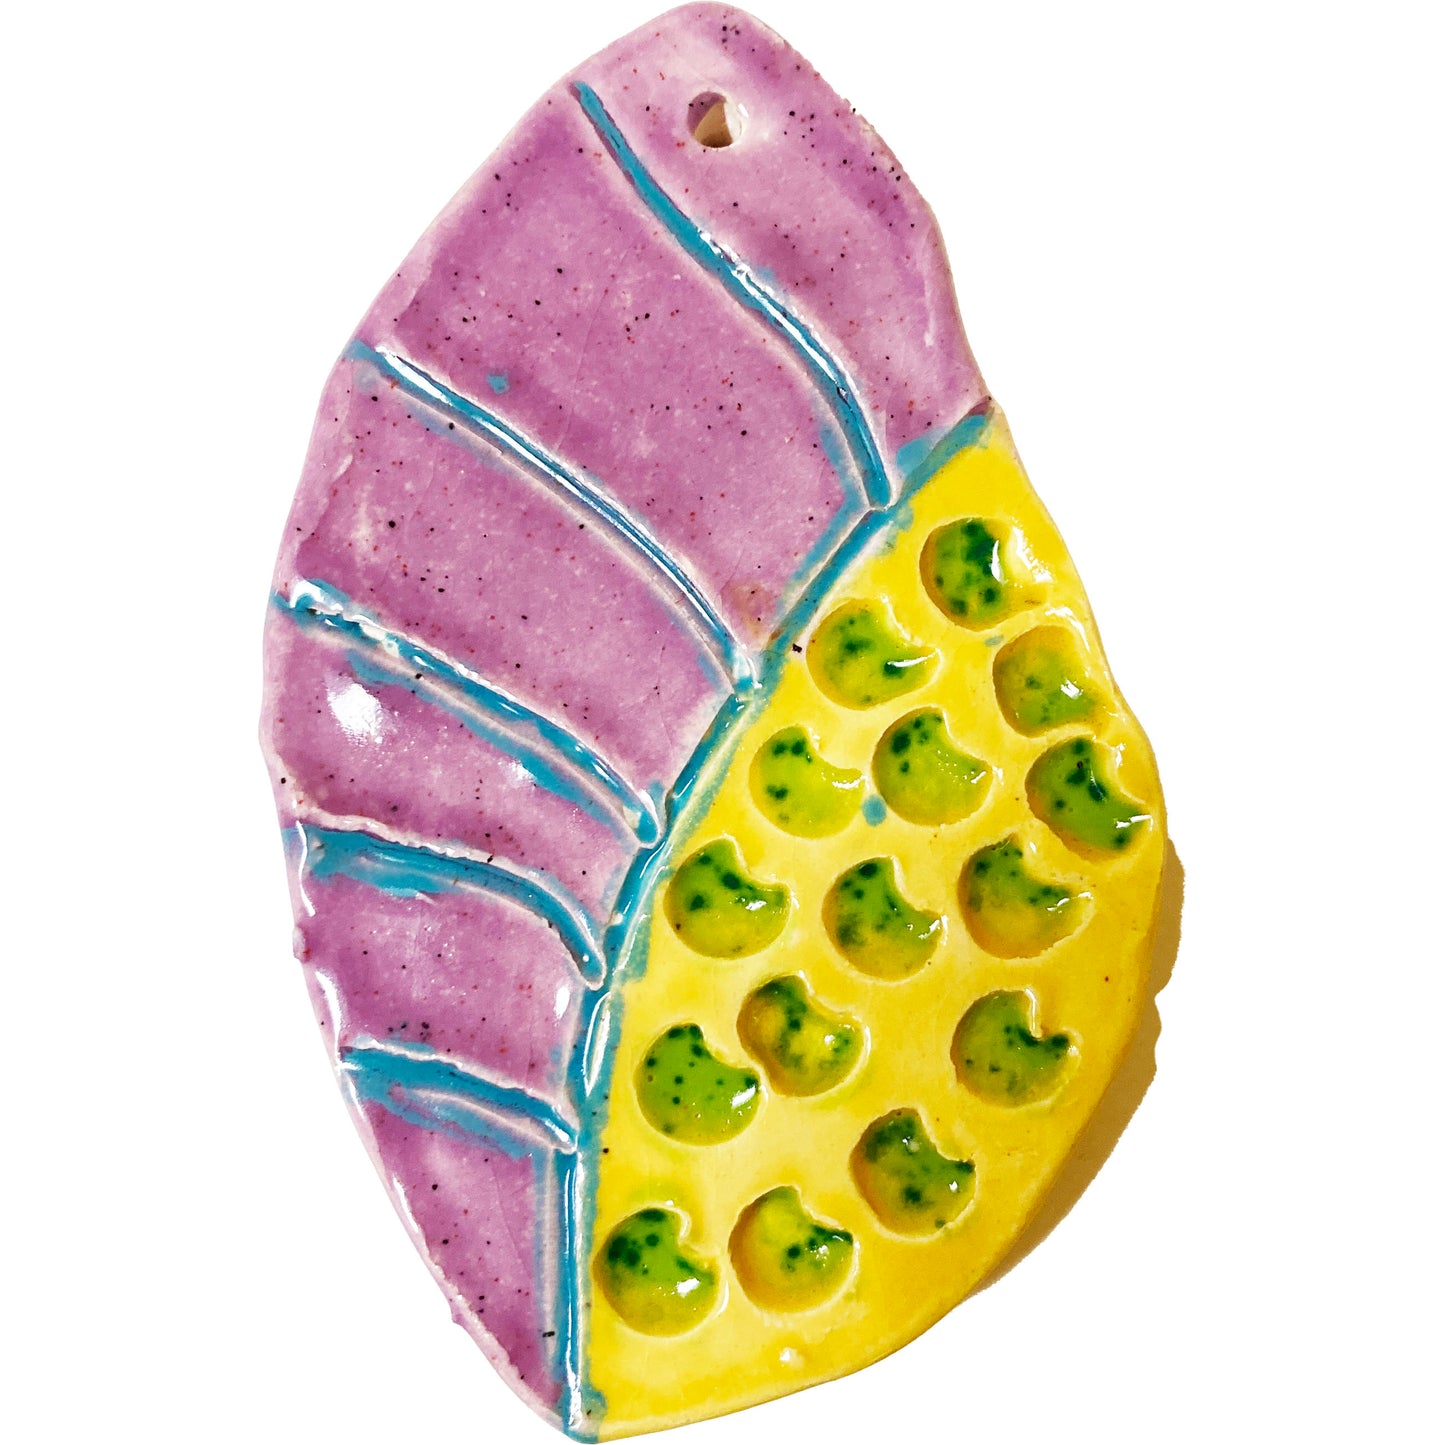 WATCH Resources Art Guild - Ceramic Arts Handmade Clay Crafts Fresh Fish 4.5-inch x 3-inch Glazed Shell made by Emily Knoles